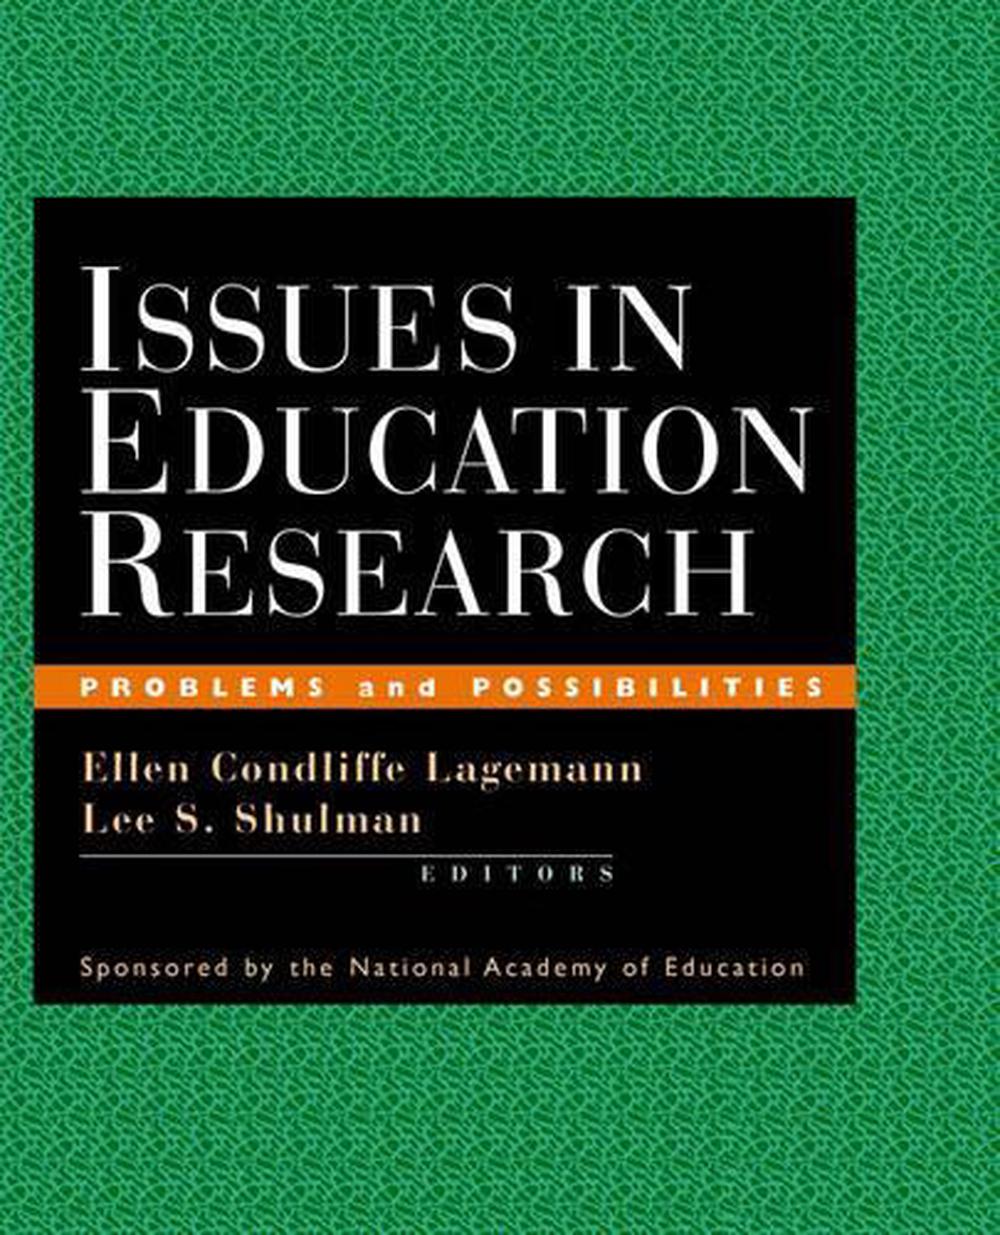 research titles about school issues